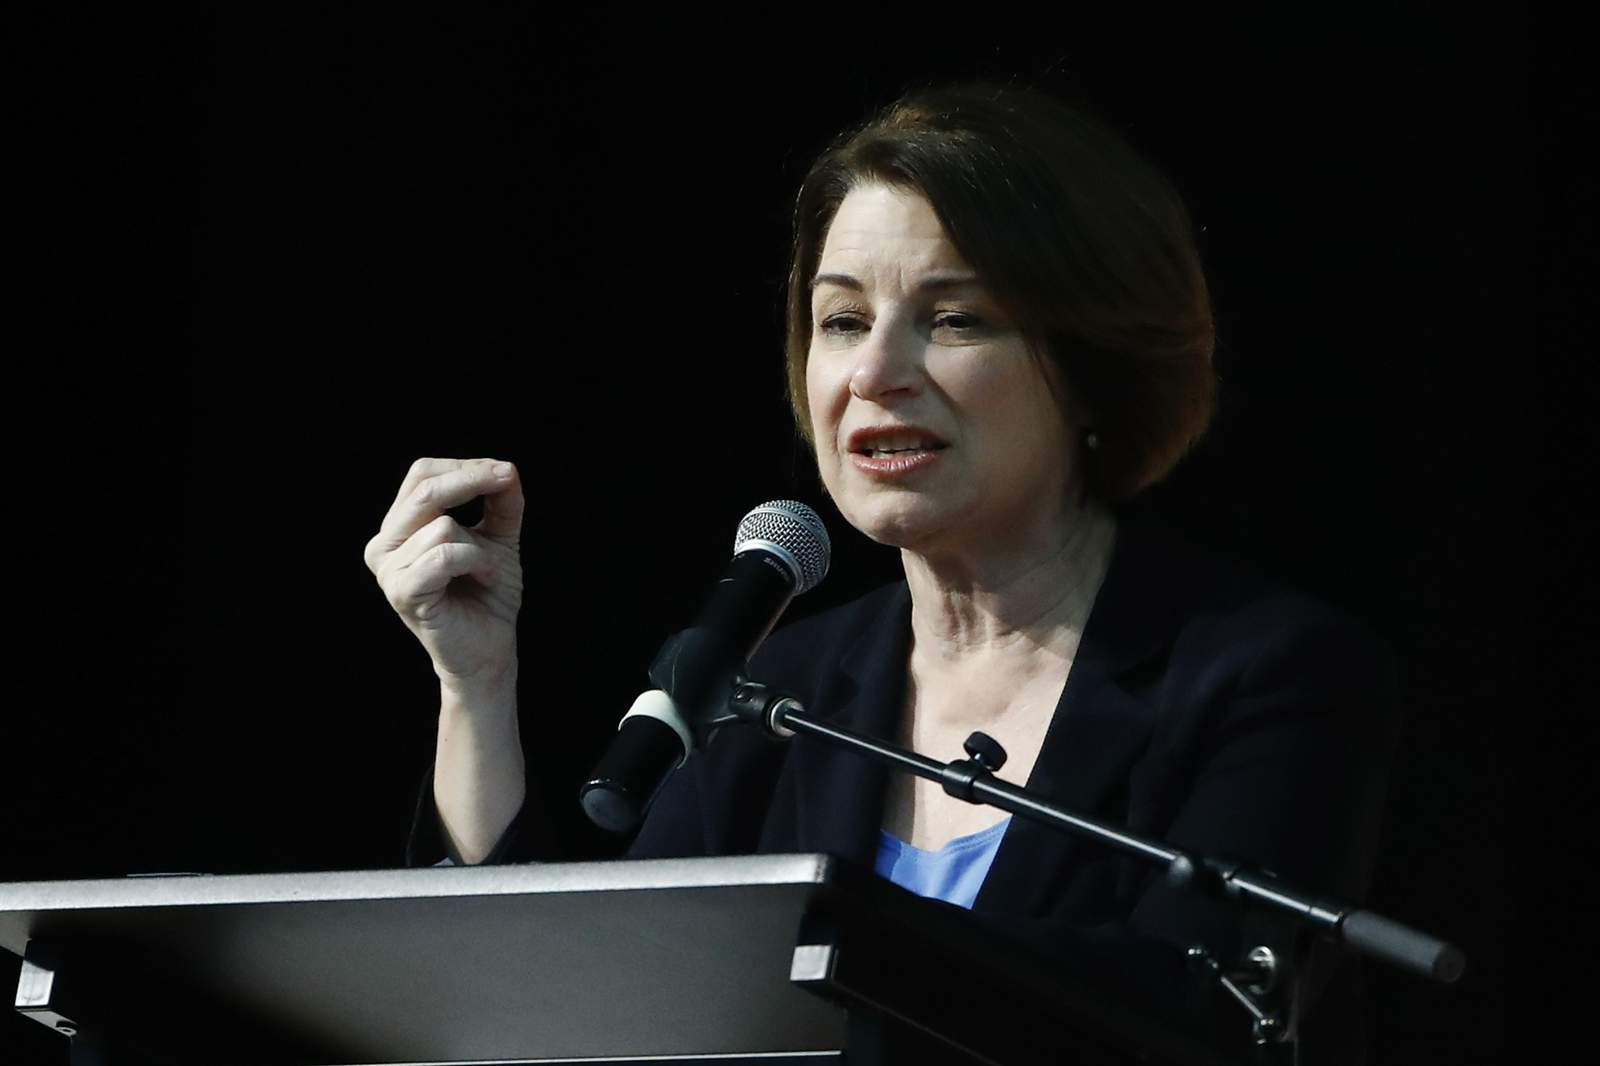 Amy Klobuchar needs black voters, but some feel 'peripheral'